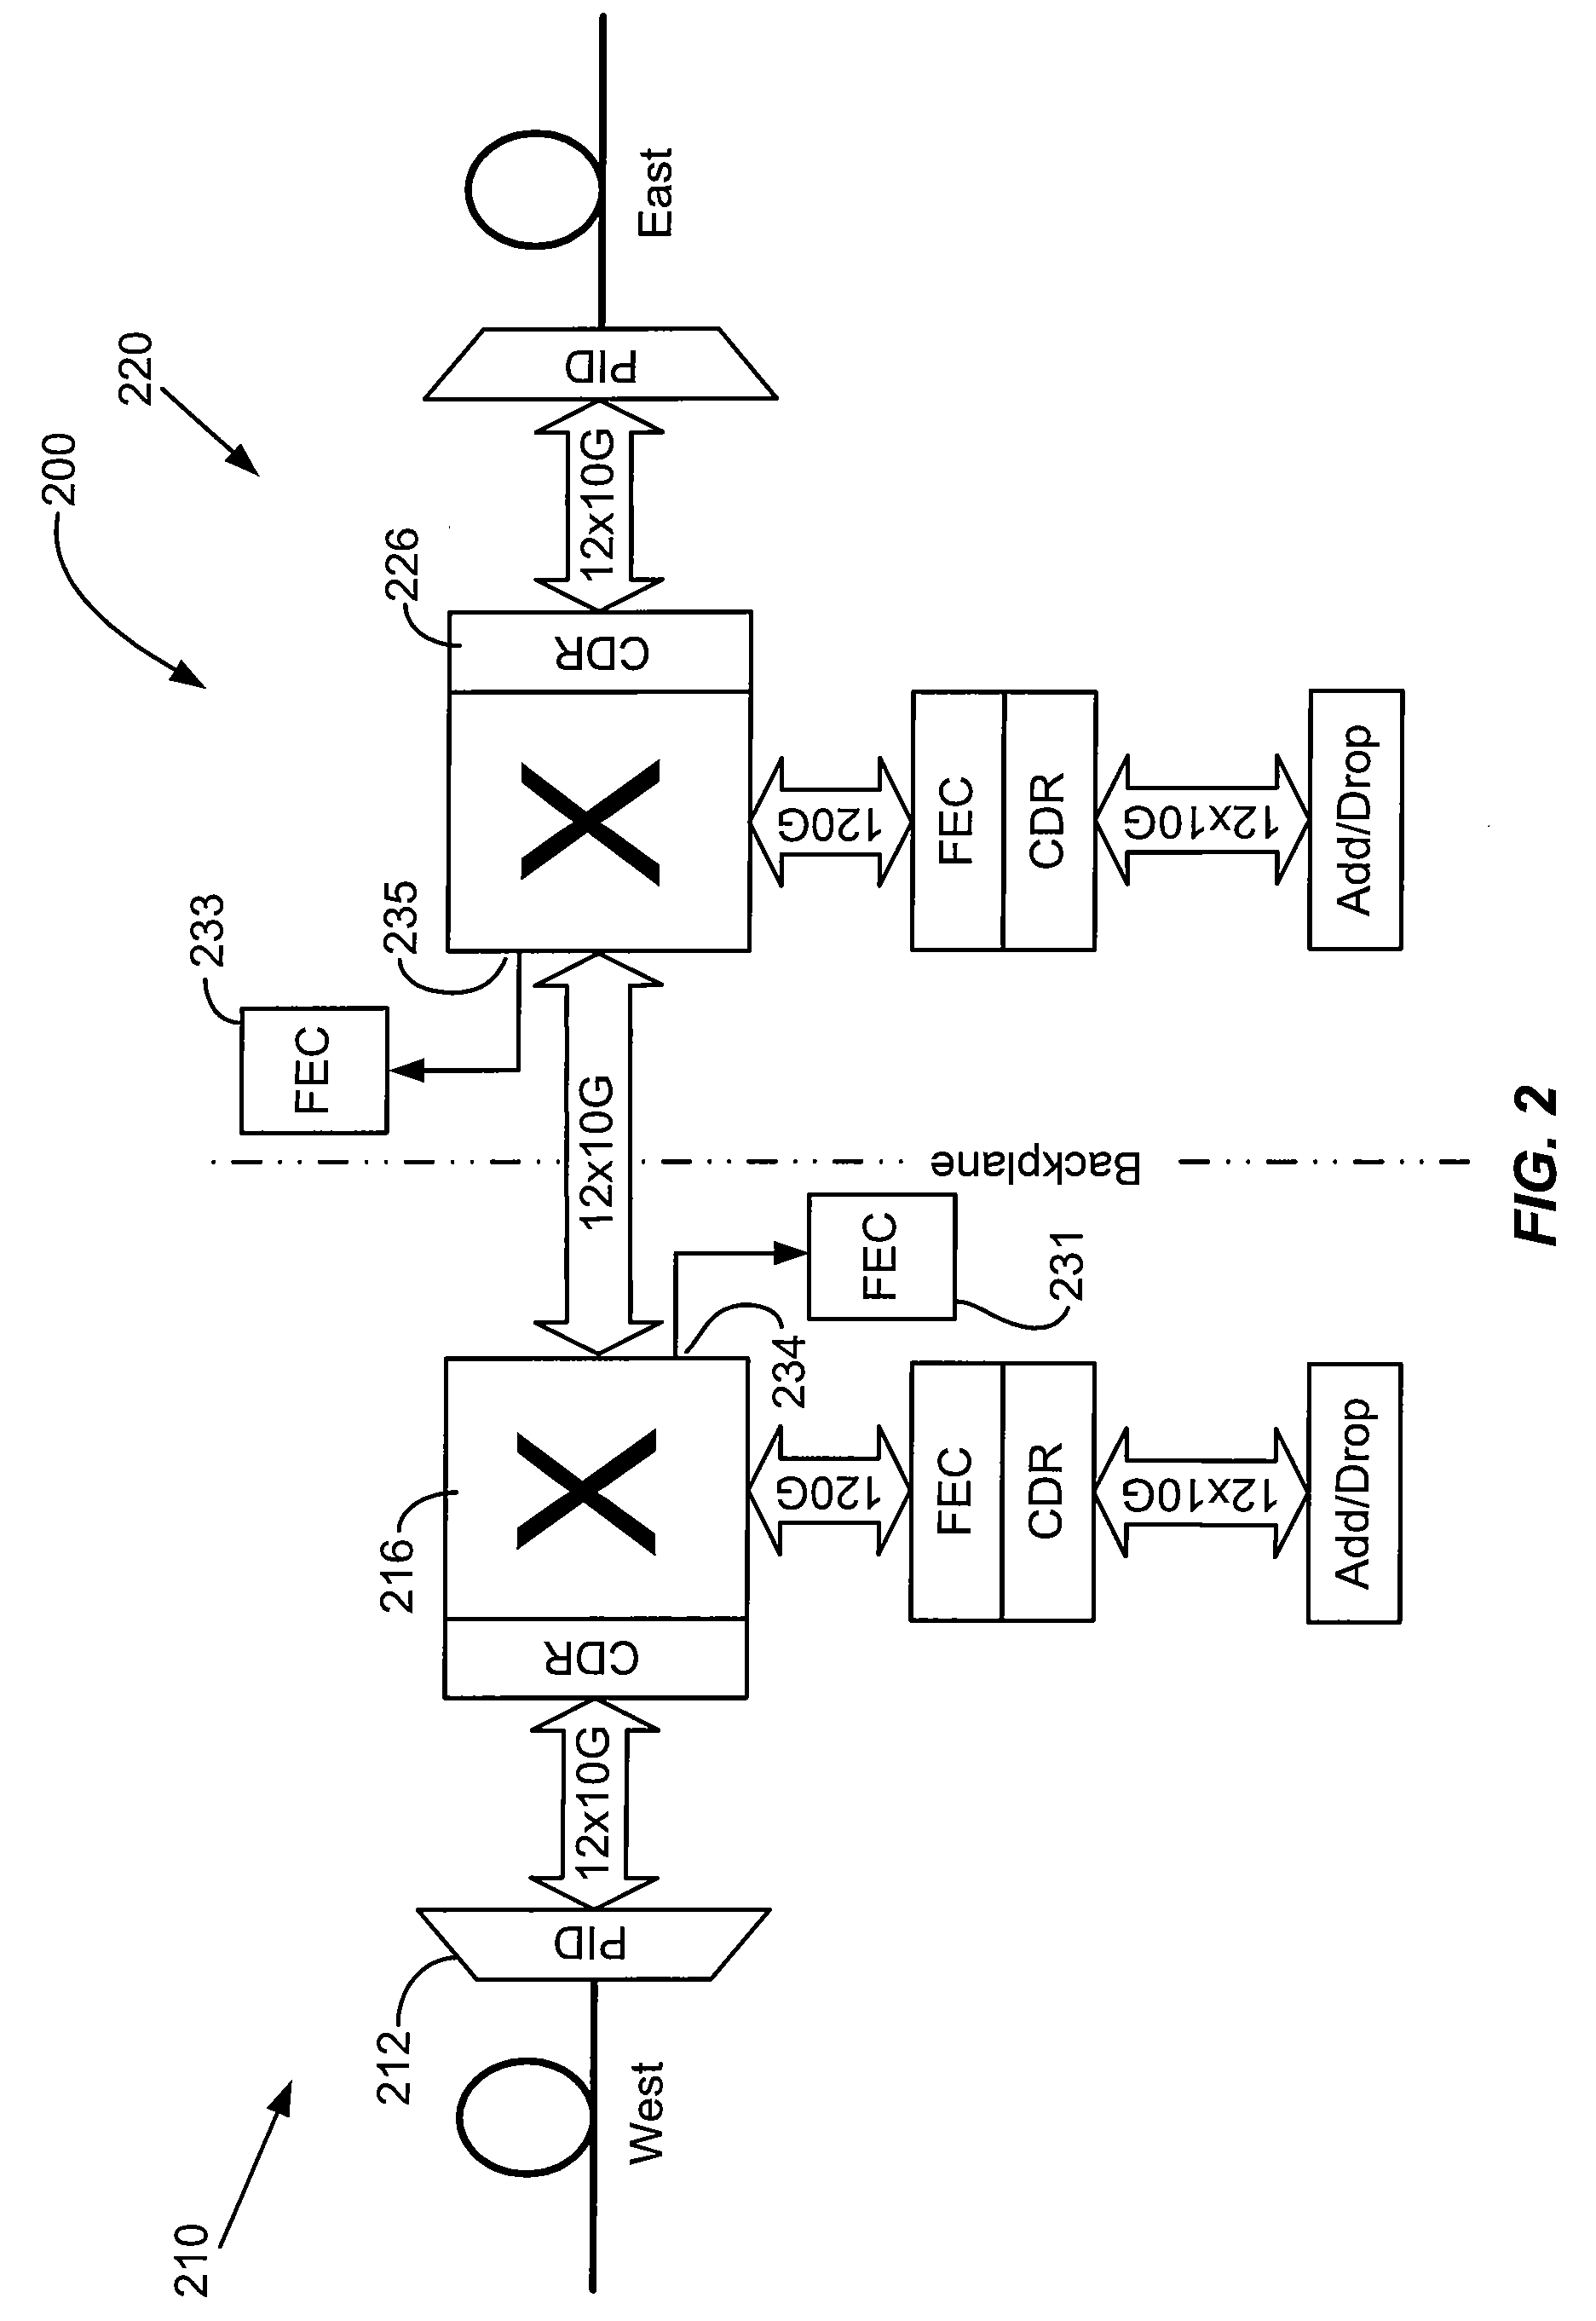 Method and system for performance monitor for digital optical DWDM networks